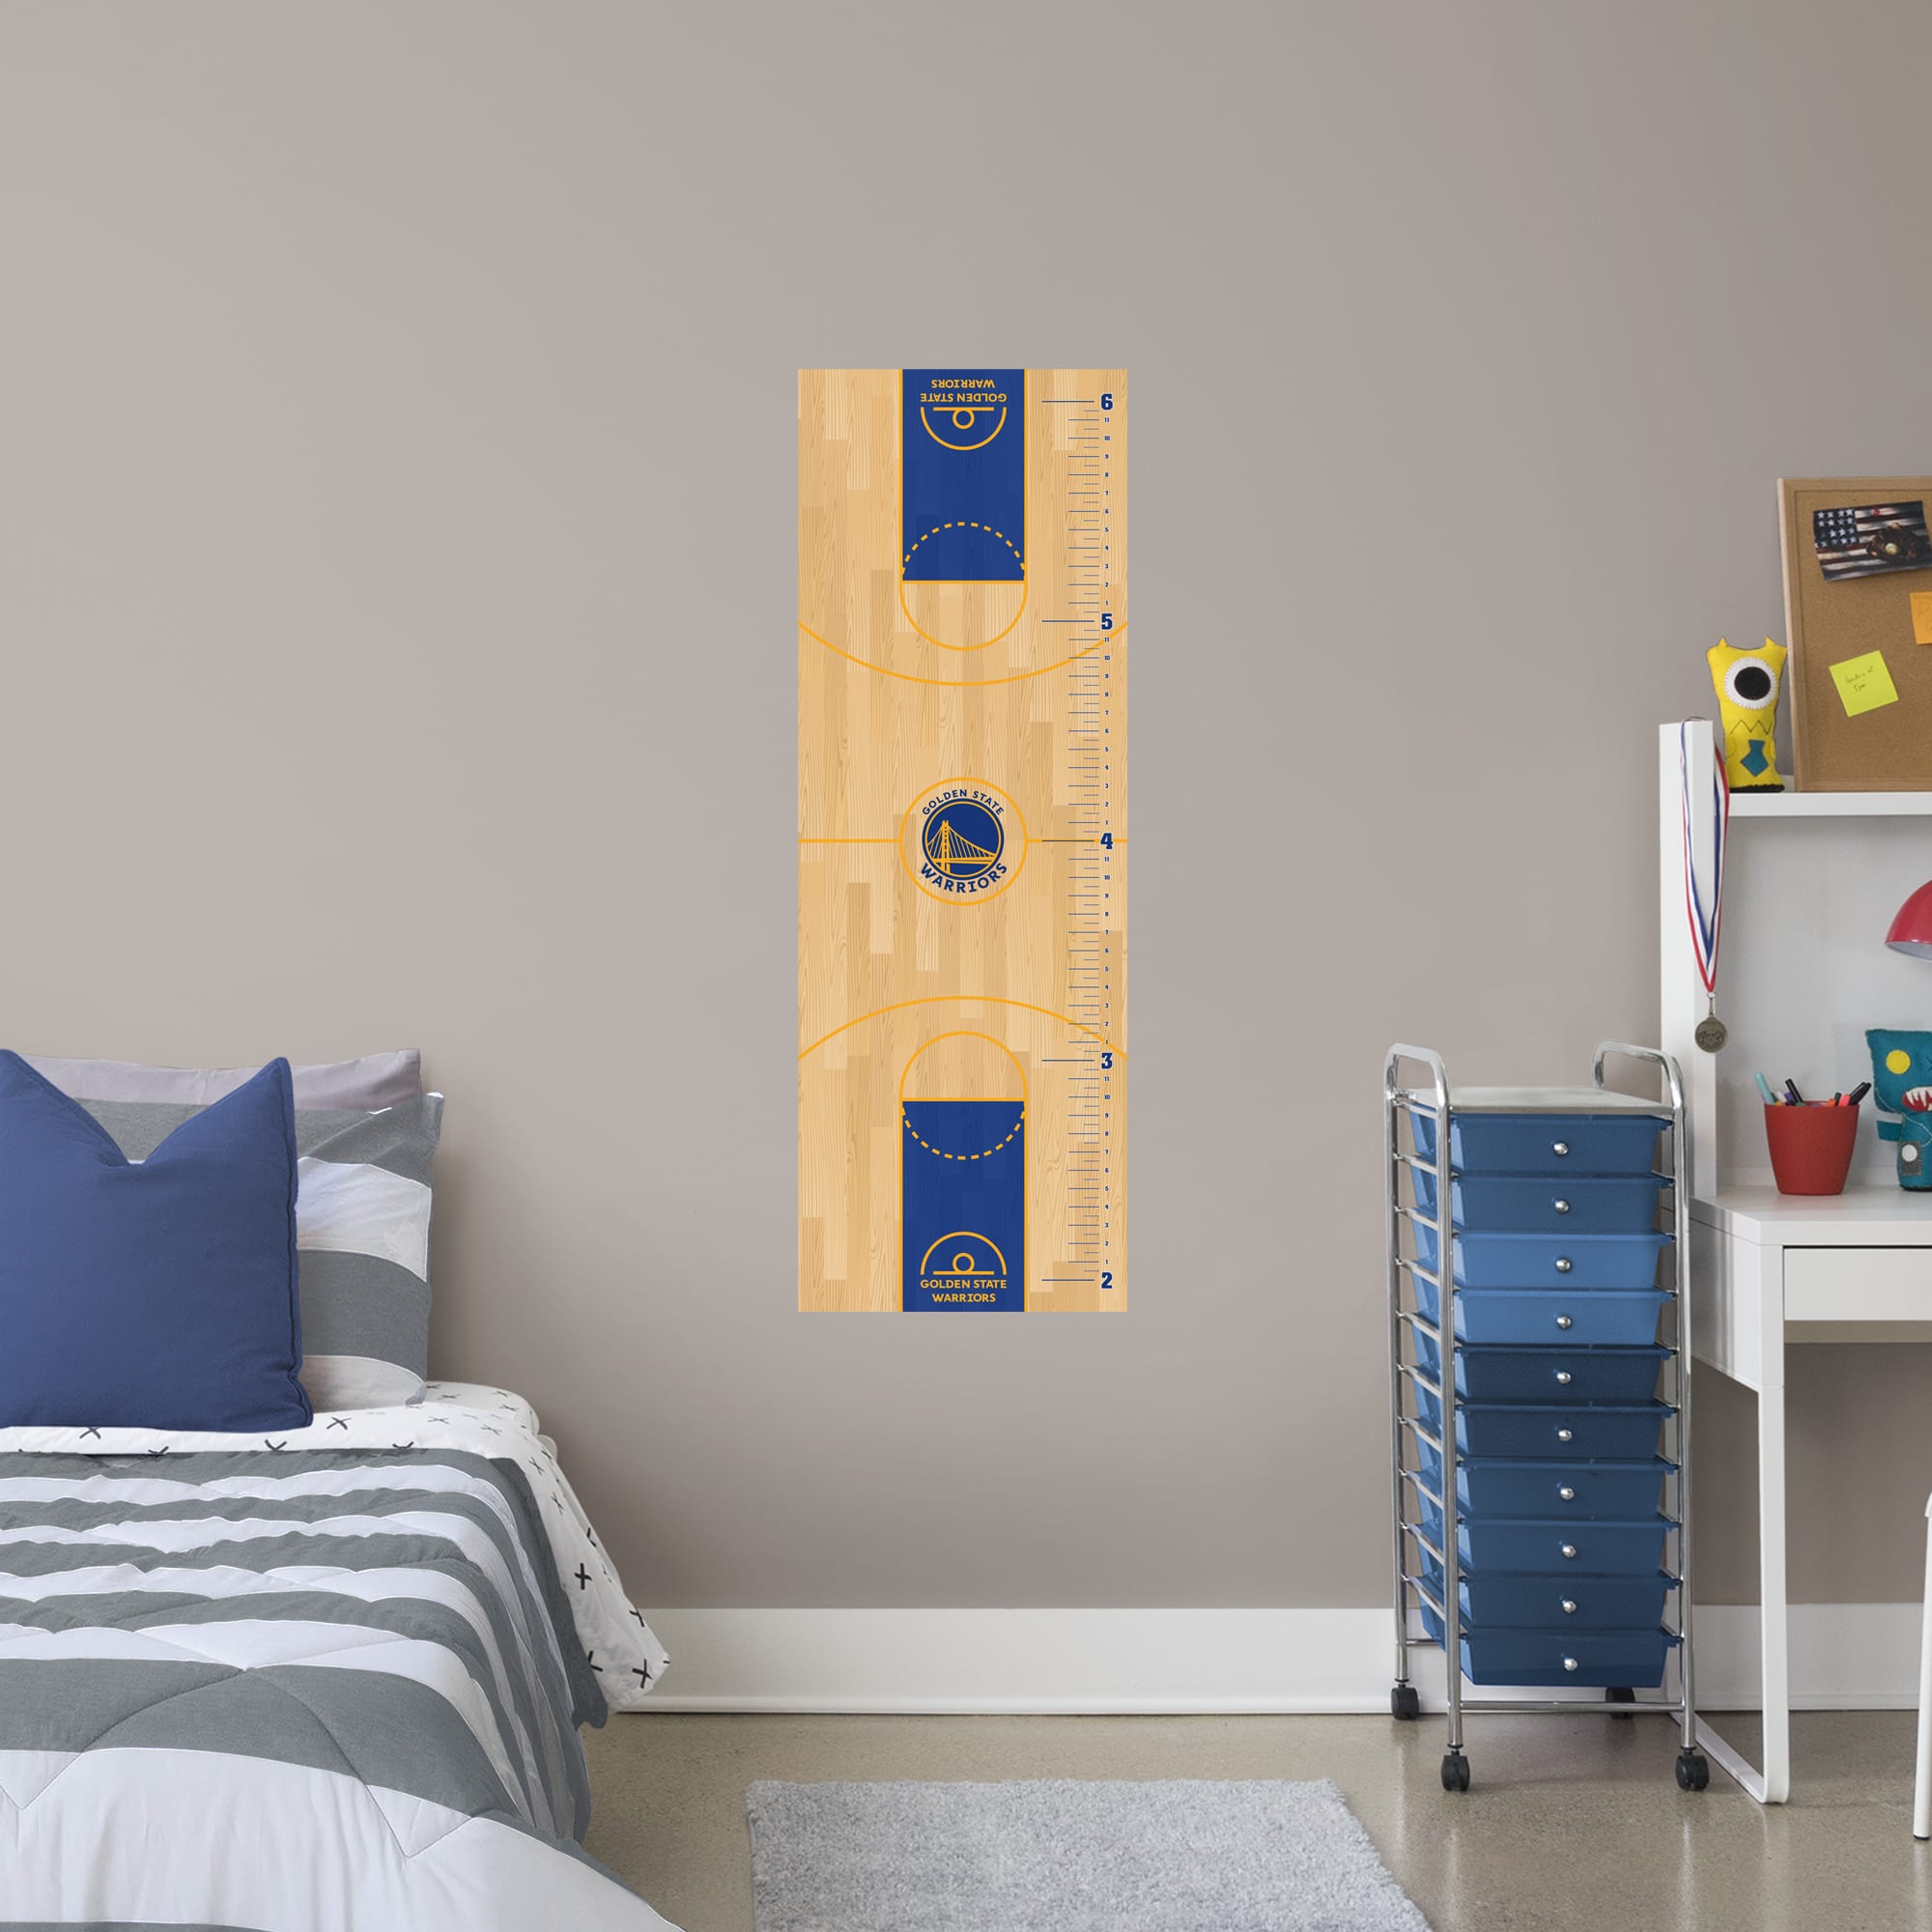 Golden State Warriors: Growth Chart - Officially Licensed NBA Removable Wall Decal 17.5"W x 51.0"H by Fathead | Vinyl